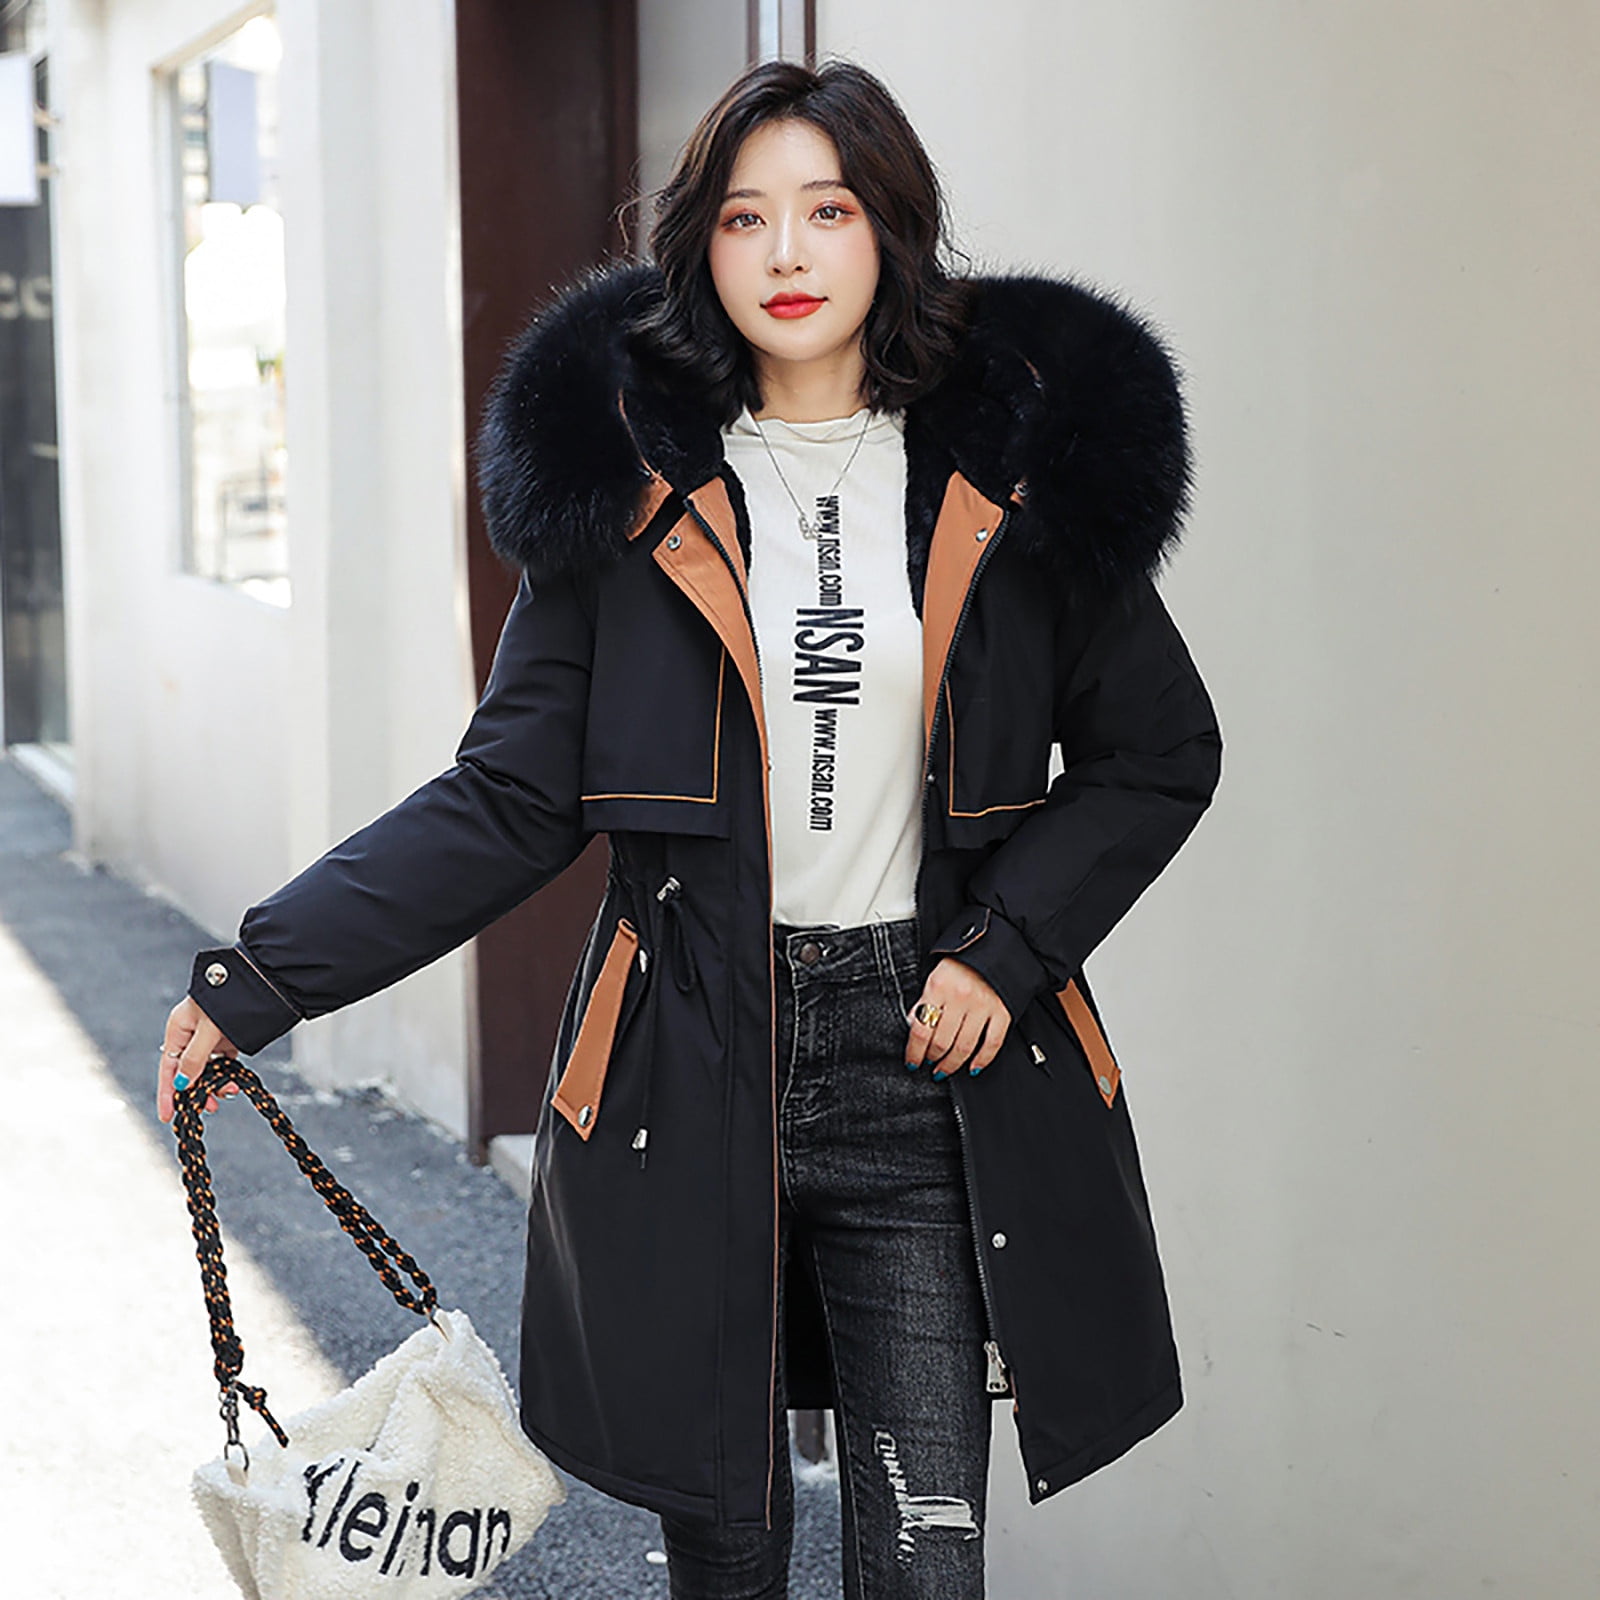 womens tops clearance under $5 Women'S Winter Fashion Tooling Long Slim  Hooded Cotton Jacket Coat Black L,ac16686 